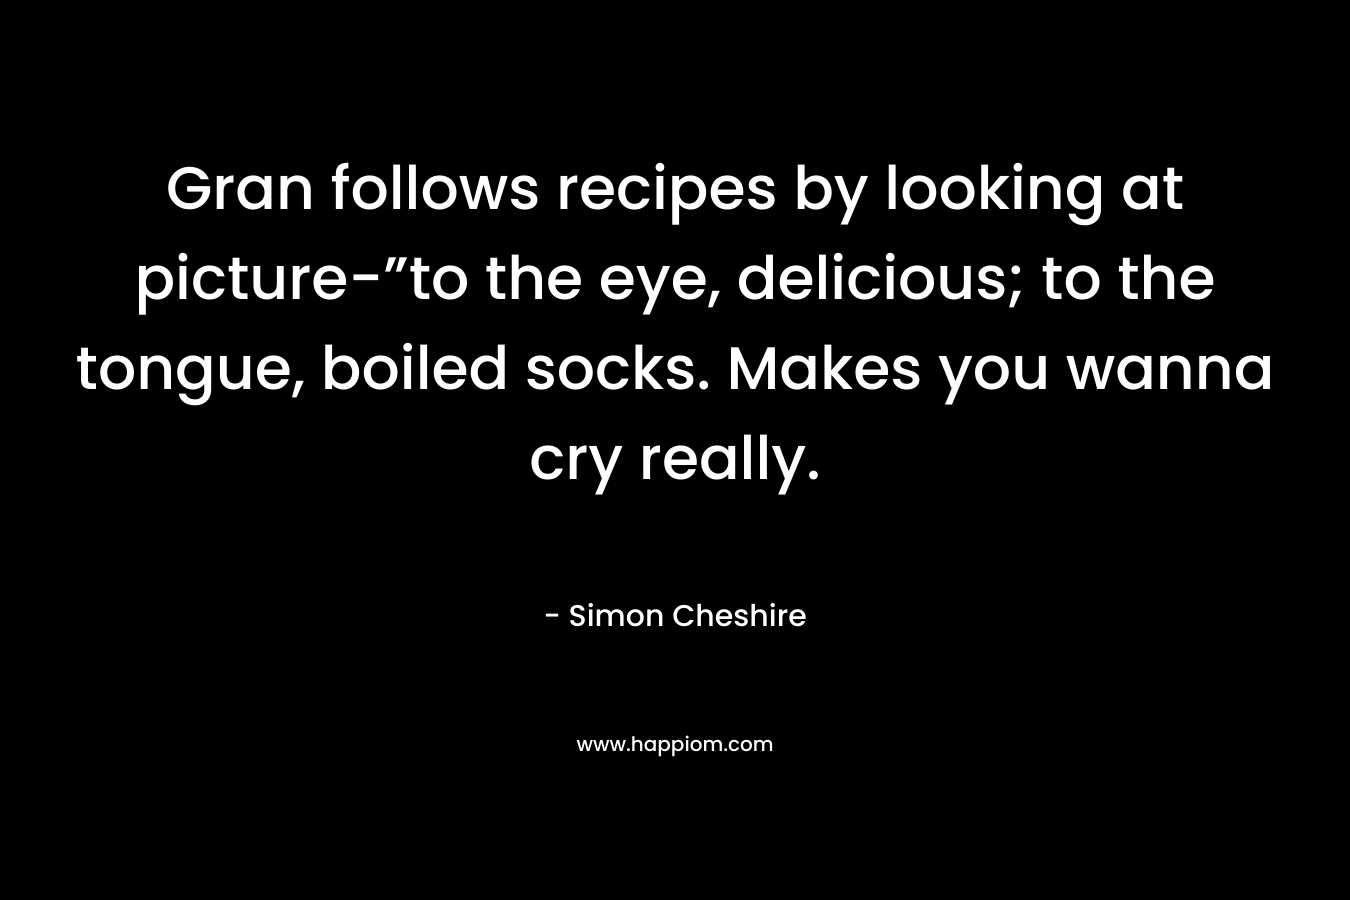 Gran follows recipes by looking at picture-”to the eye, delicious; to the tongue, boiled socks. Makes you wanna cry really.